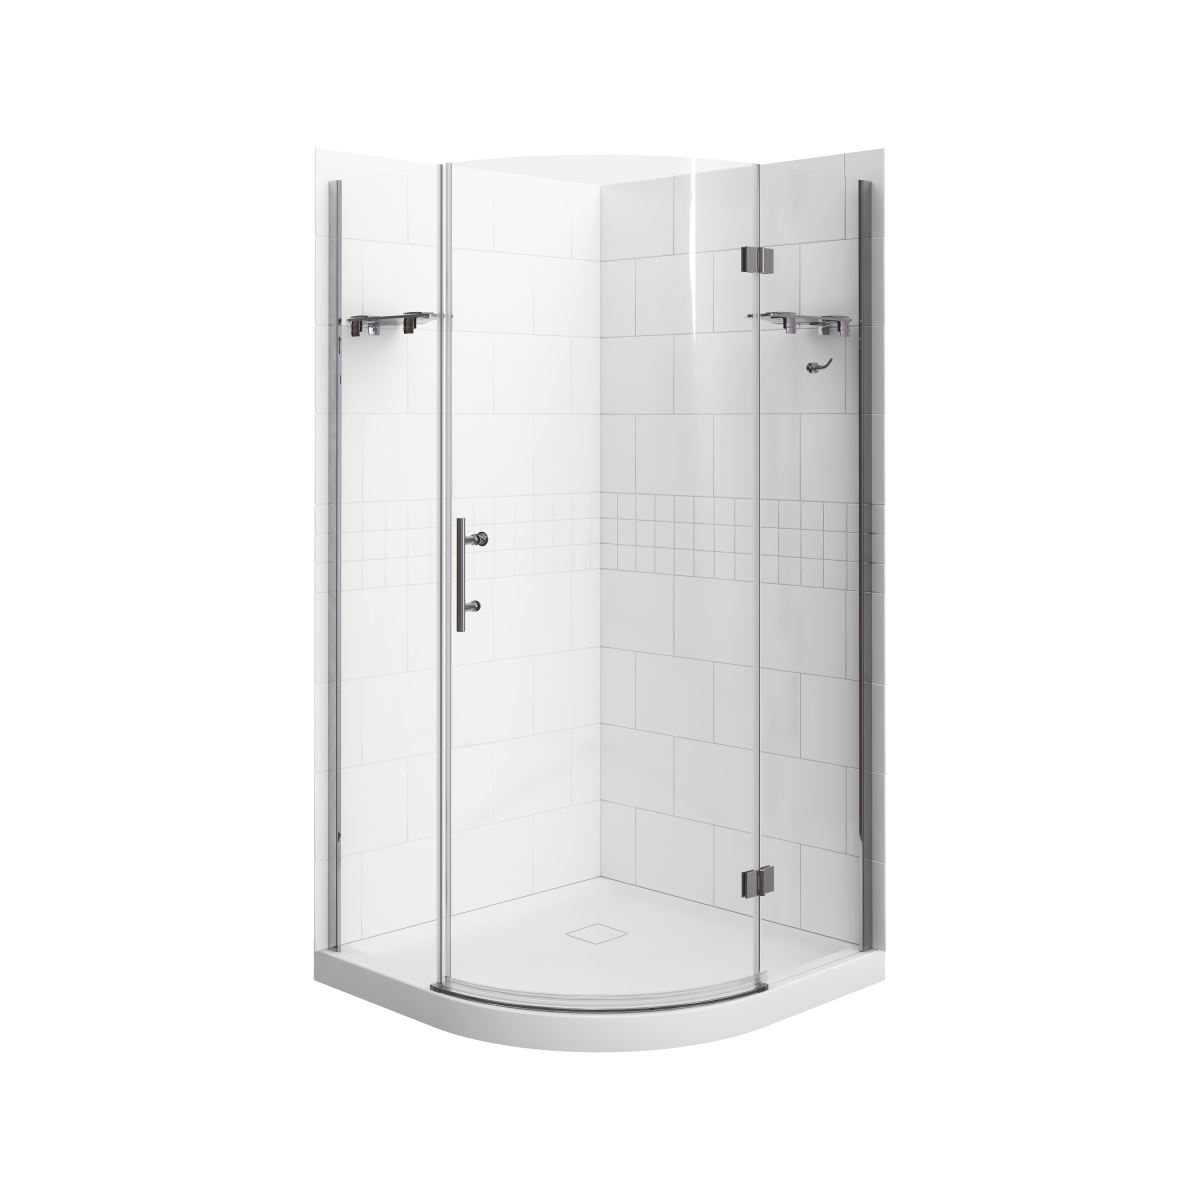 Picture of A&E Bath and Shower SK-PNR-38-KIT-T A&E Bath and Shower Risco-38 Shower Kit